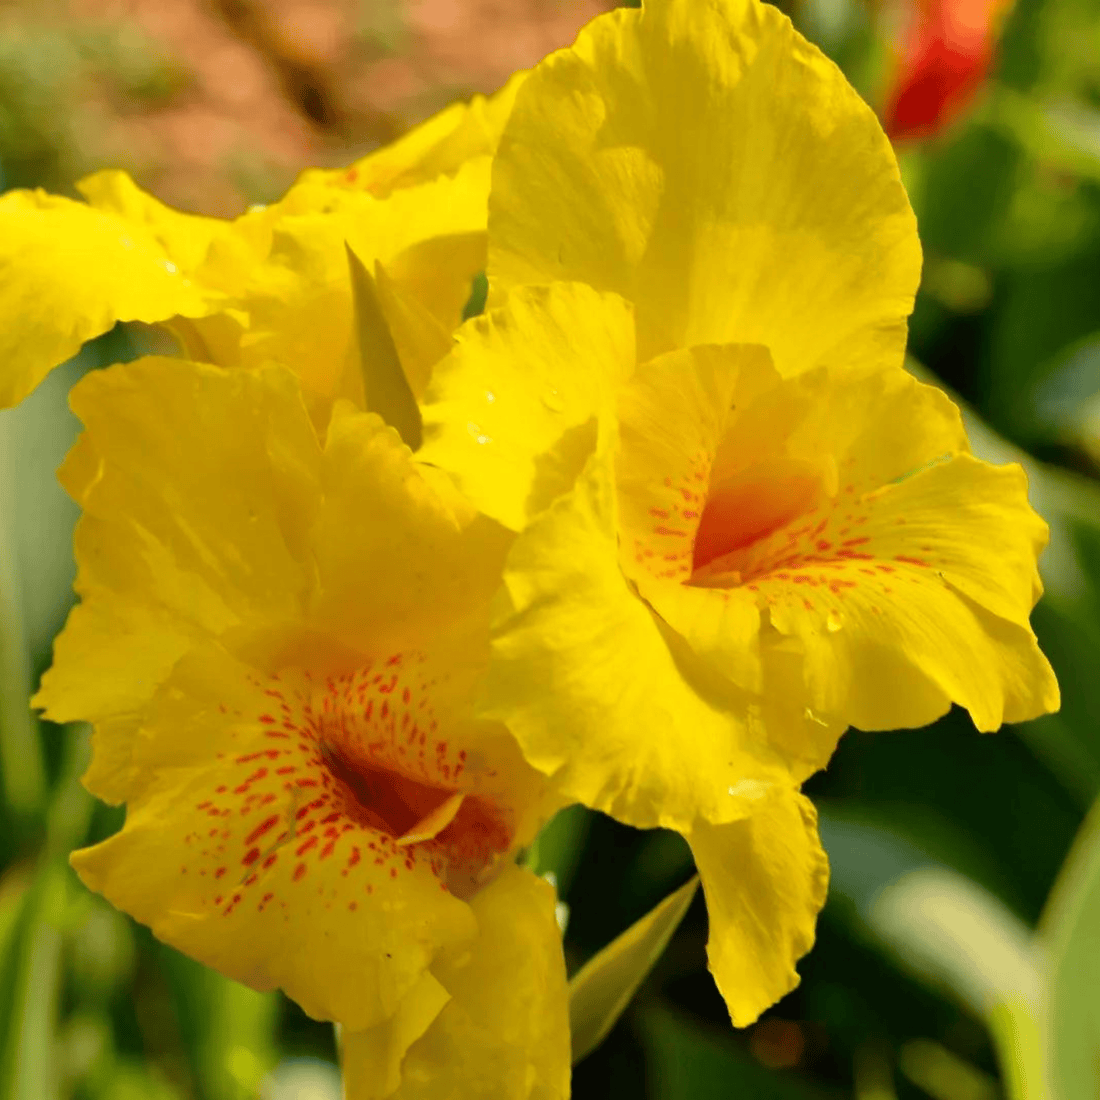 Yellow Canna Lily / Indian Shot (Canna indica) Flowering Live Plant